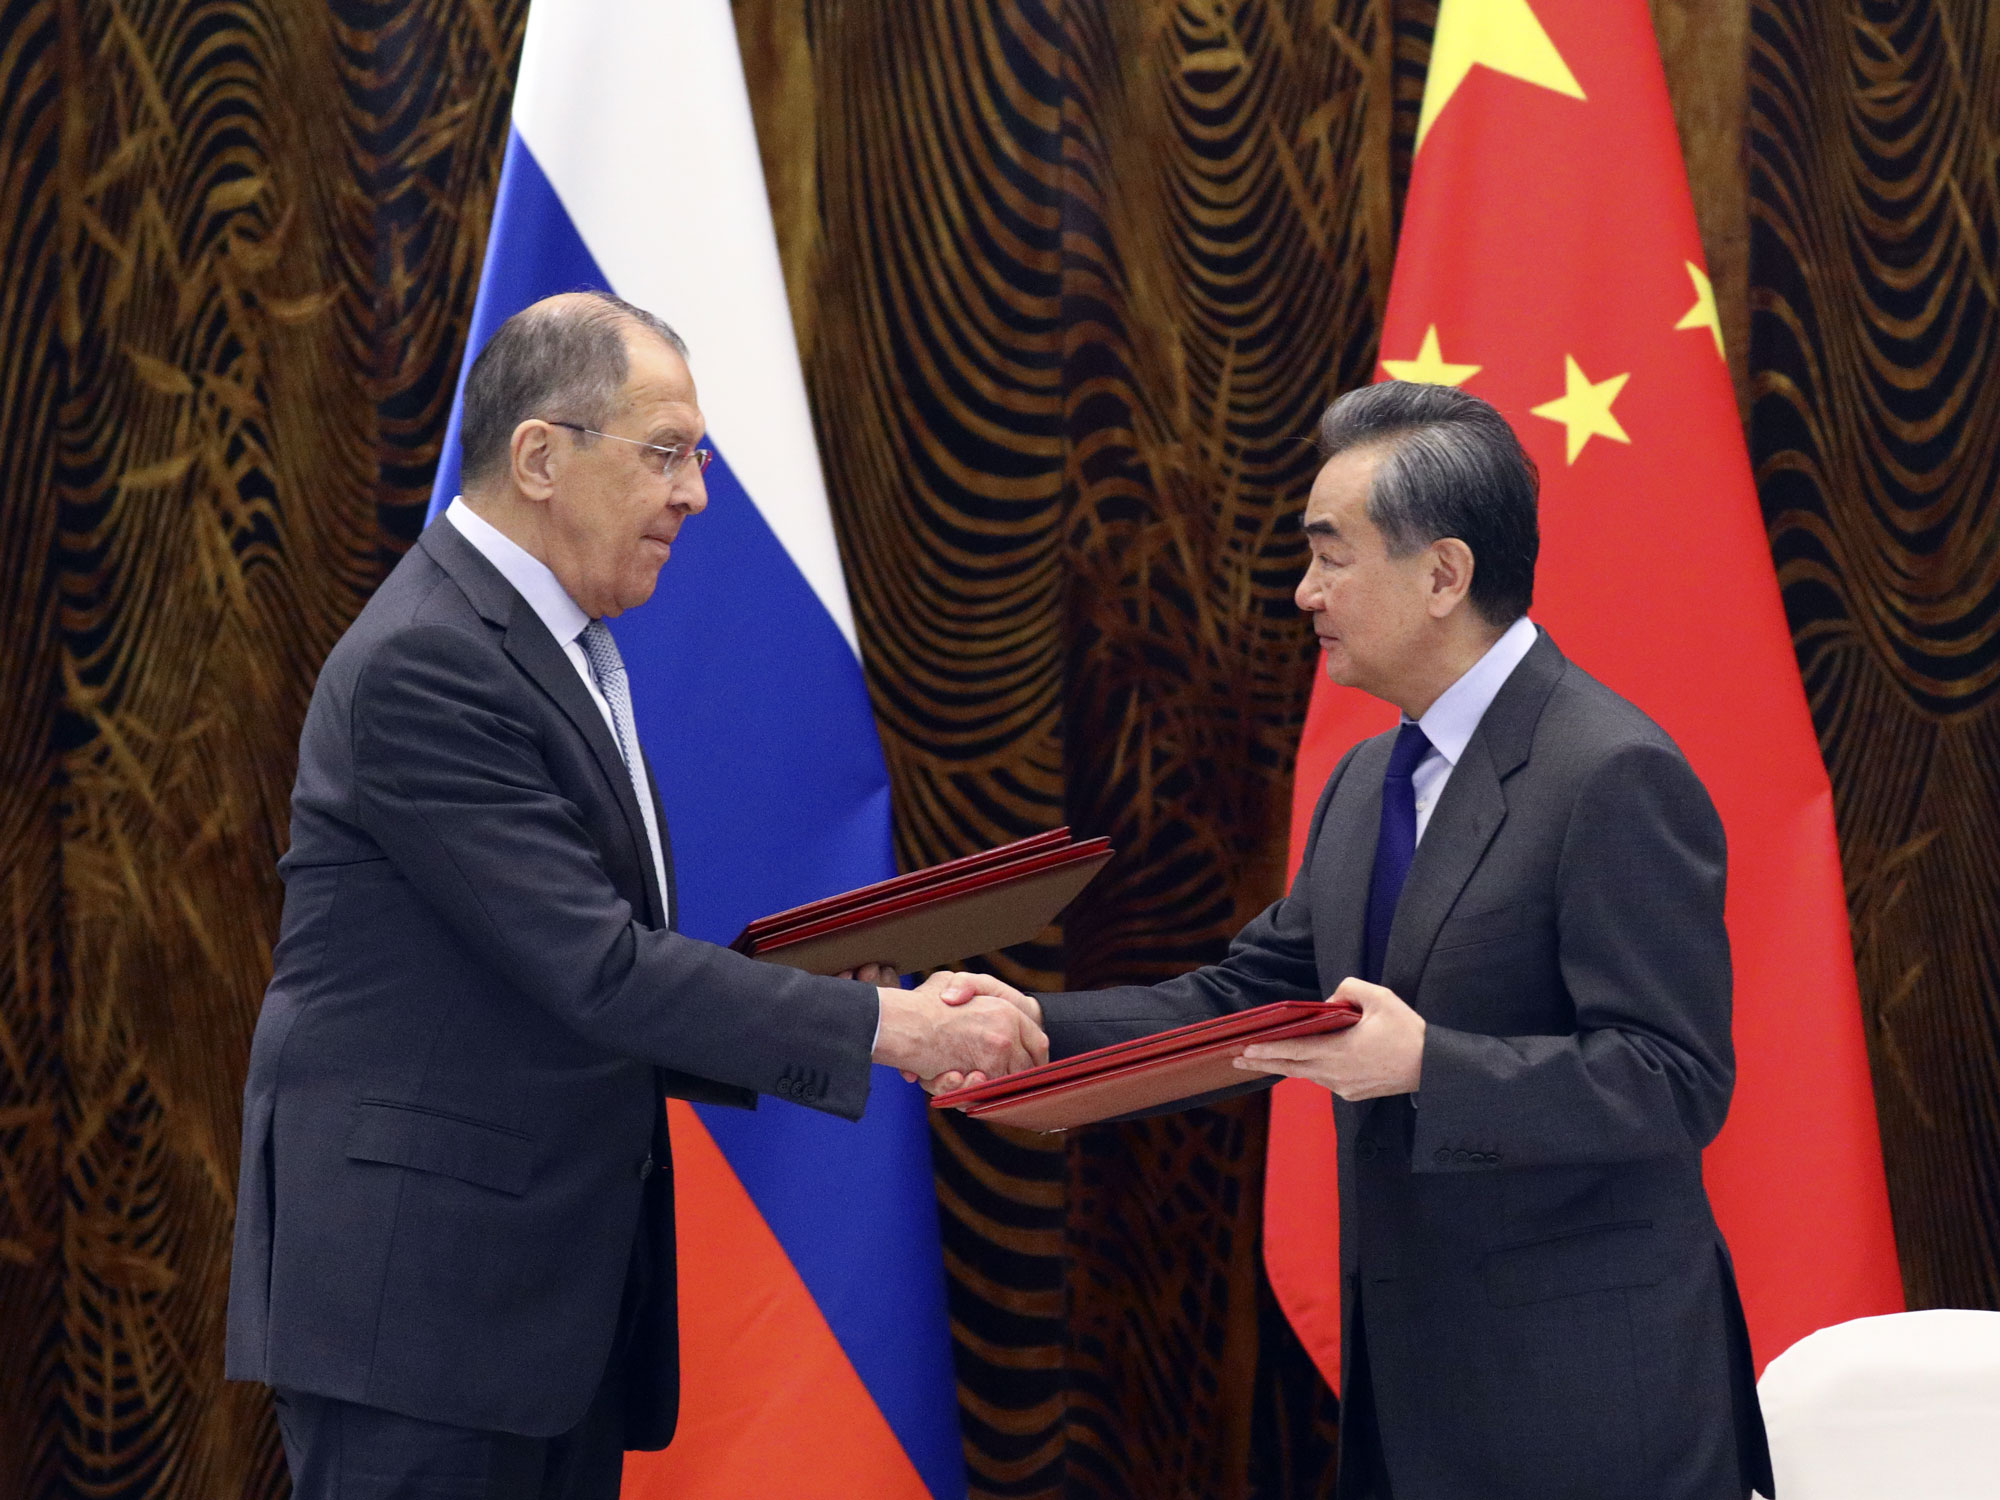 Wang Yi, right, and Sergei Lavrov during a signing ceremony in Beijing on March 23.